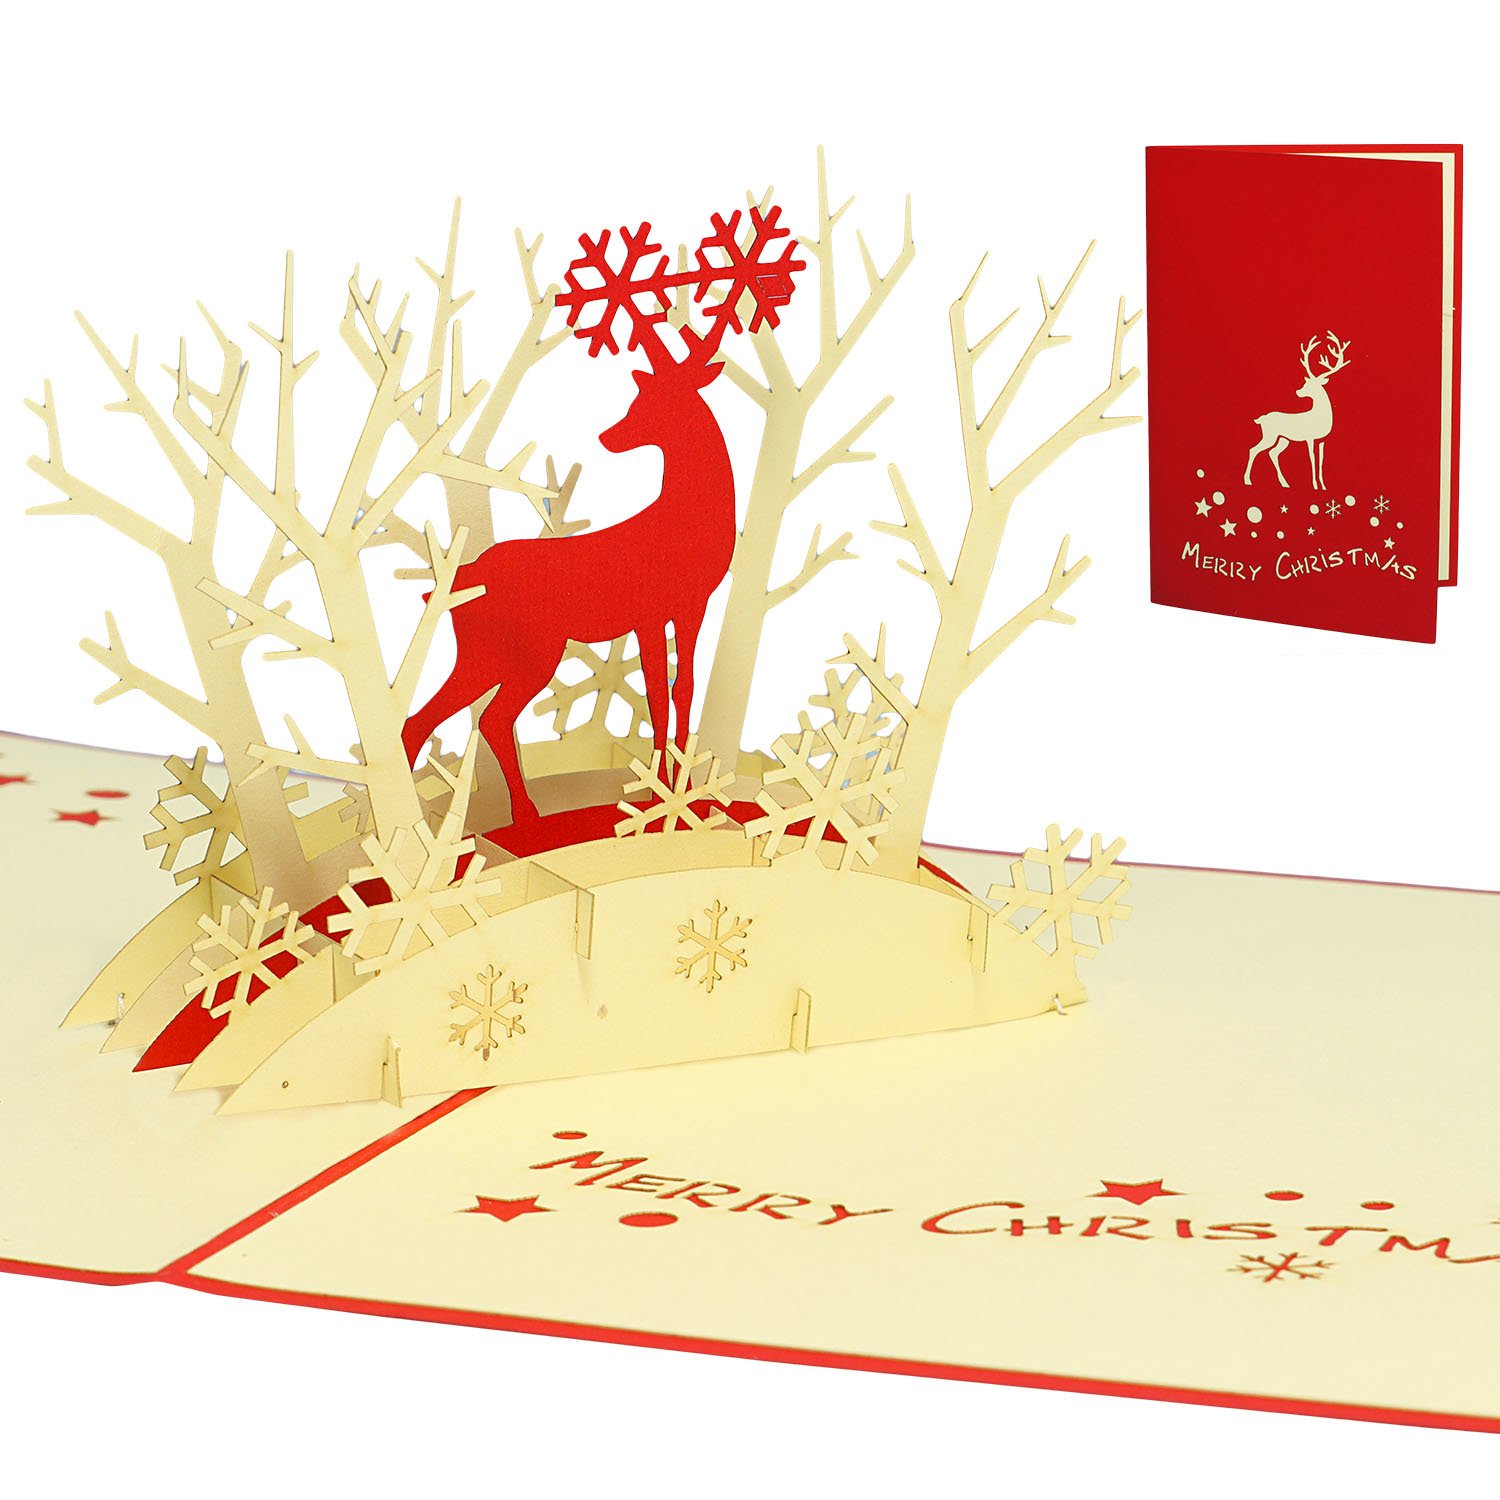 LINPOPUP Pop Up 3D Card, Christmas Card, Greeting Card, Reindeer in the Forest, LINPopUp®, N417